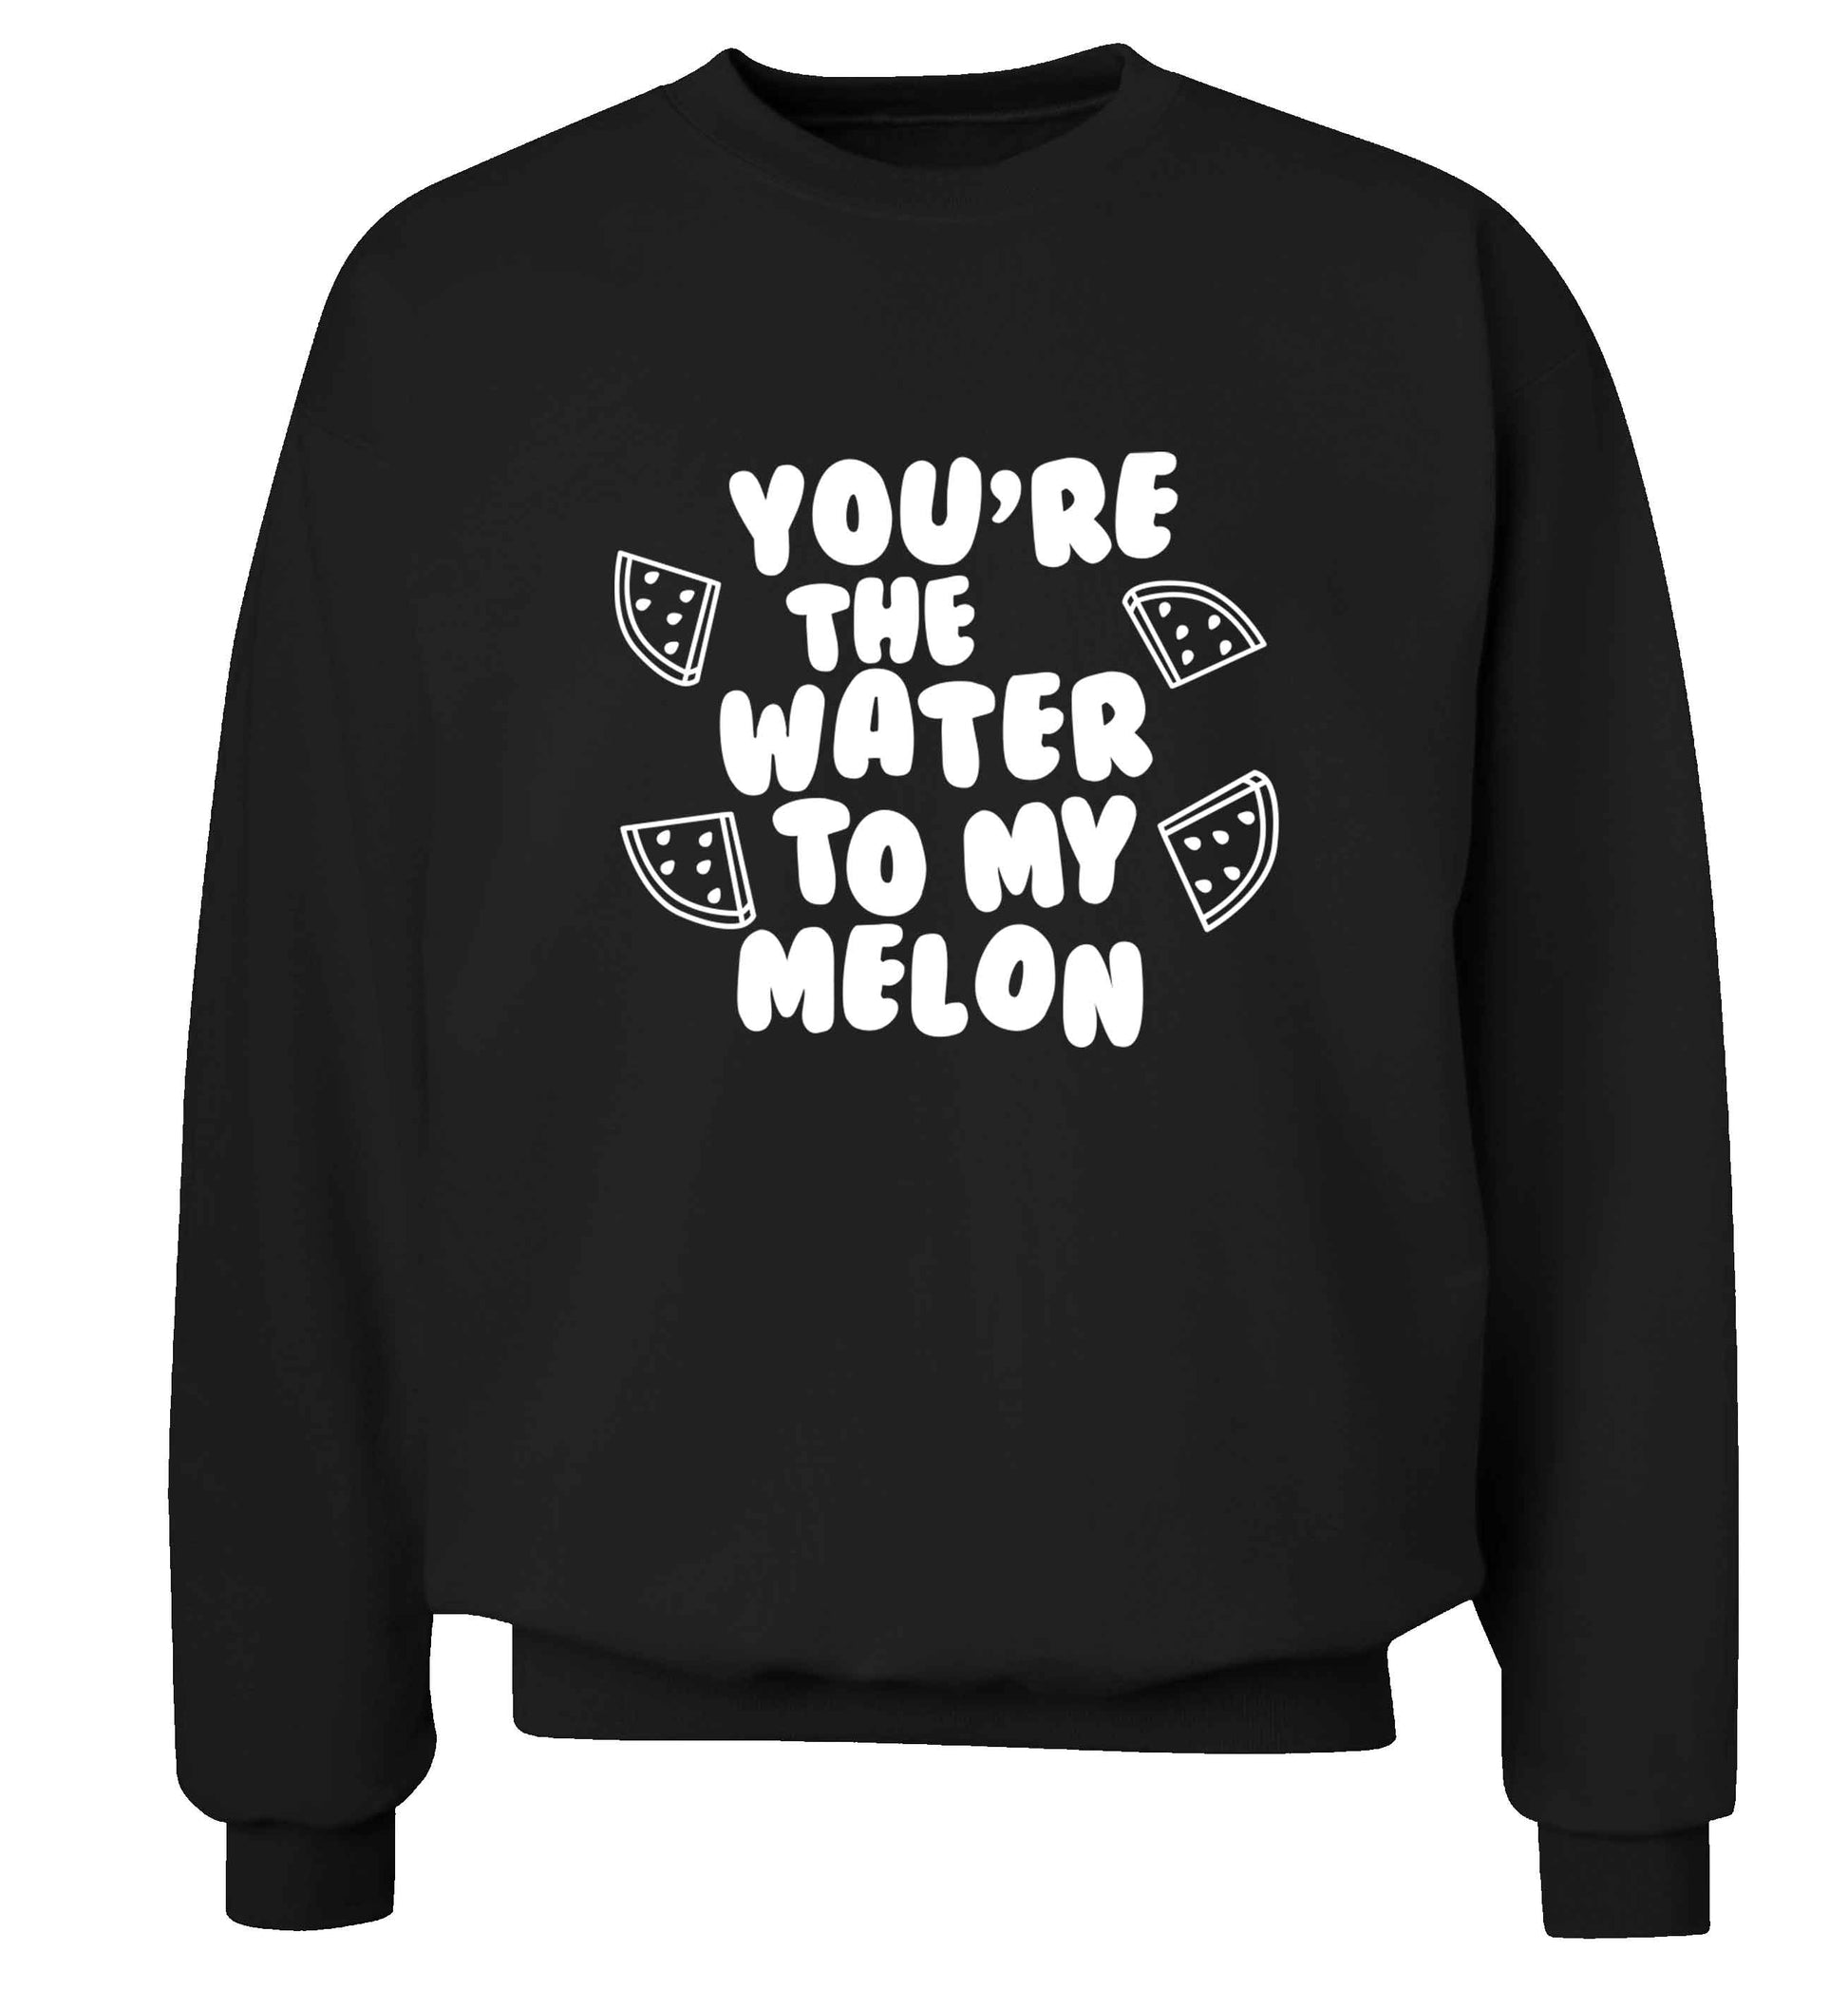 You're the water to my melon adult's unisex black sweater 2XL